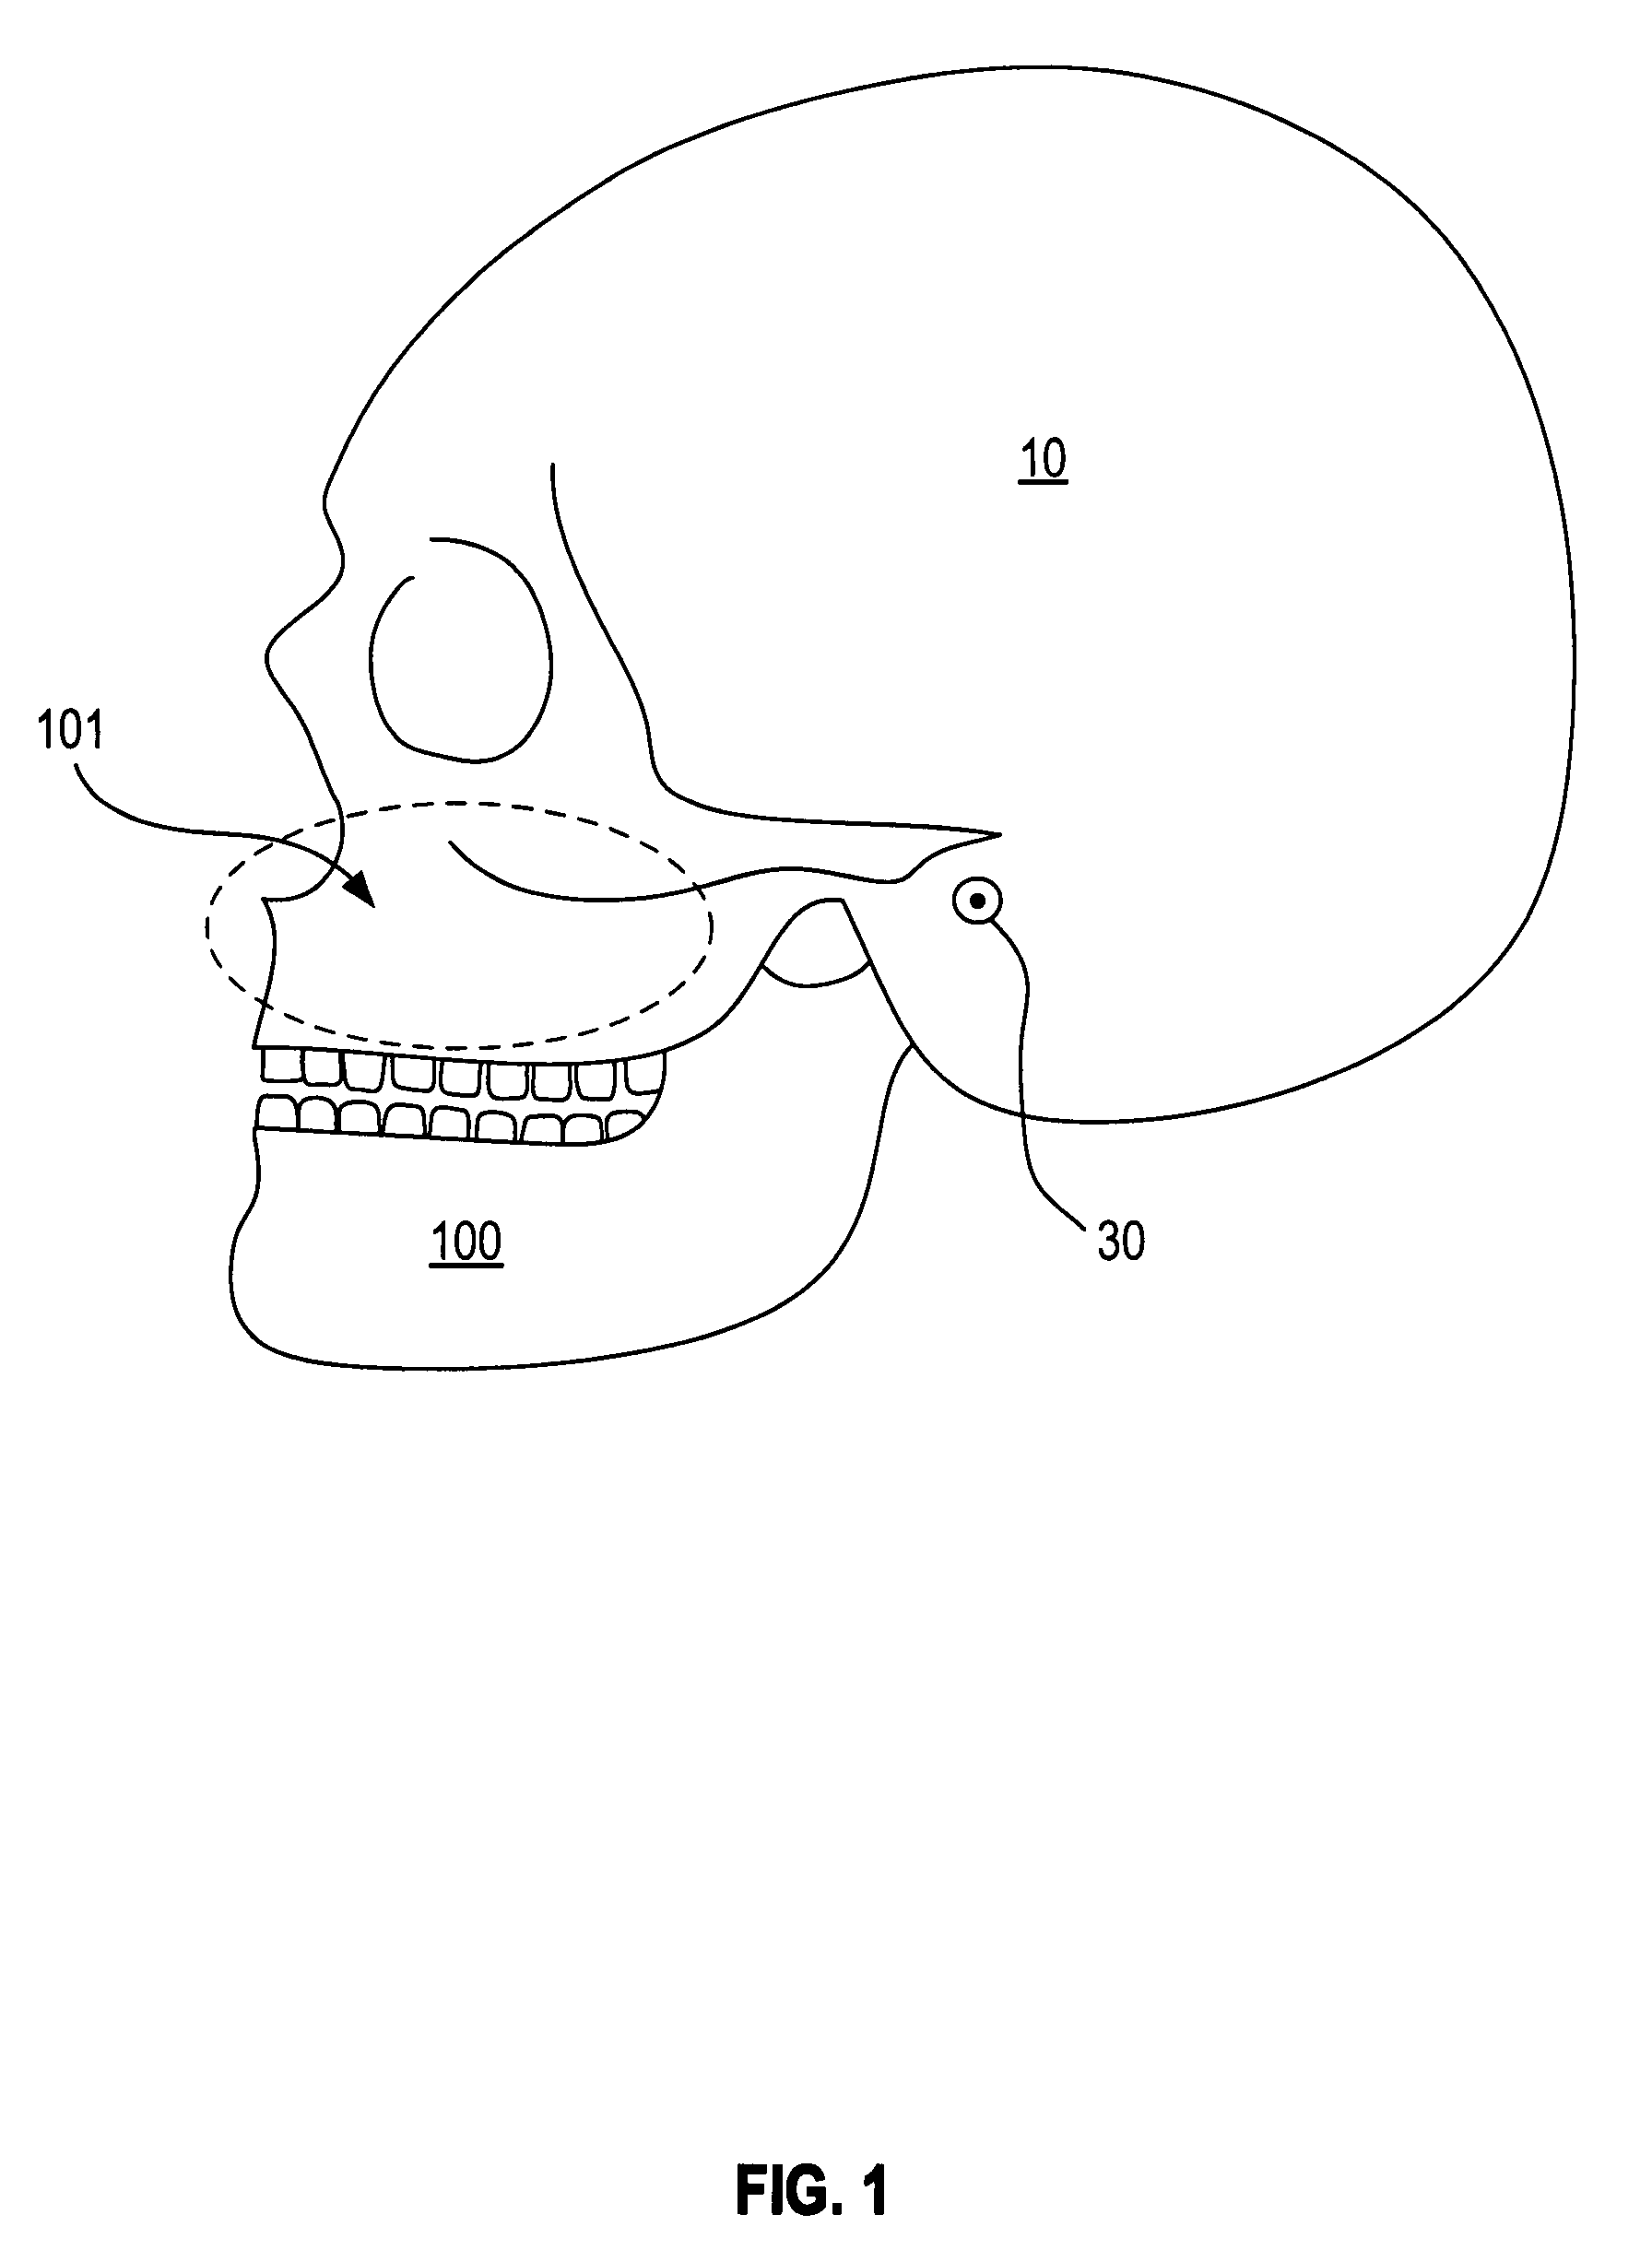 Active attachments for interacting with a polymeric shell dental appliance